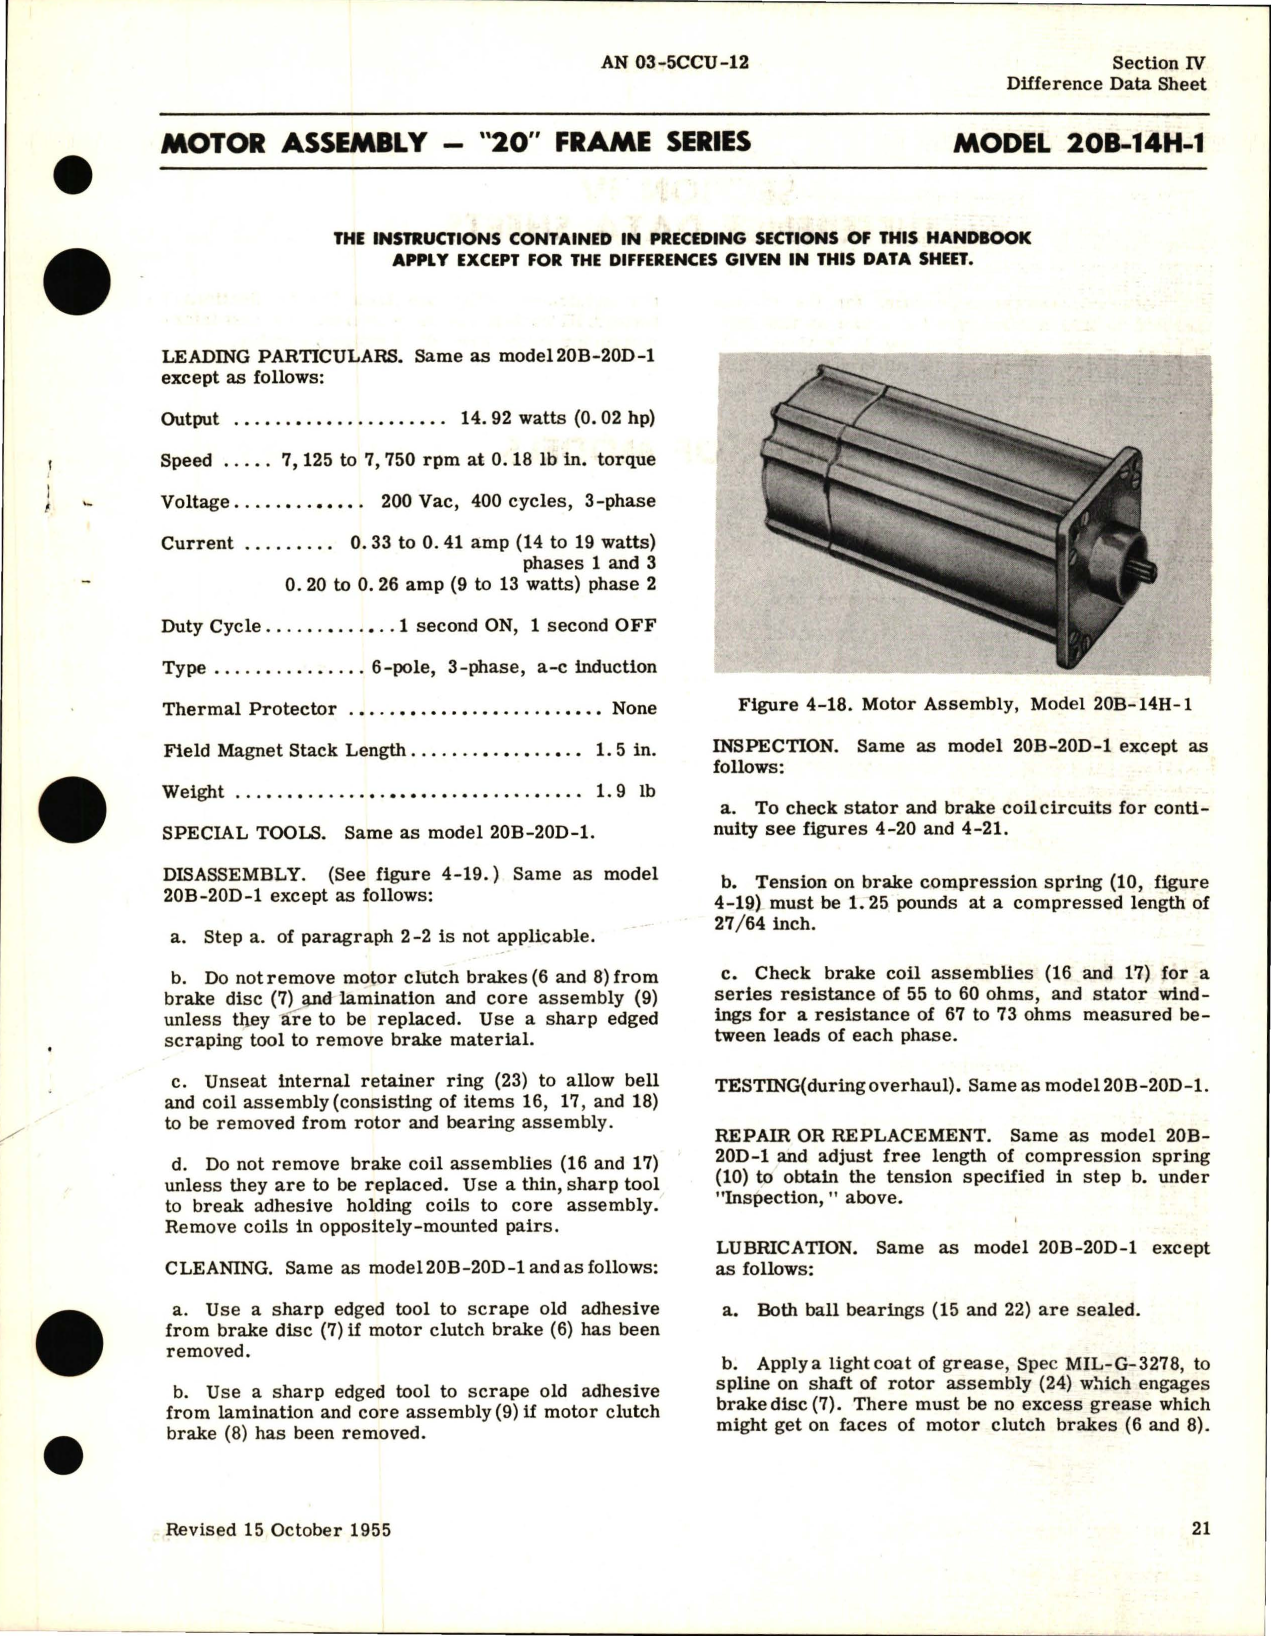 Sample page 5 from AirCorps Library document: Overhaul Instructions for Fractional Horsepower Electric Motors - 20 Frame Series